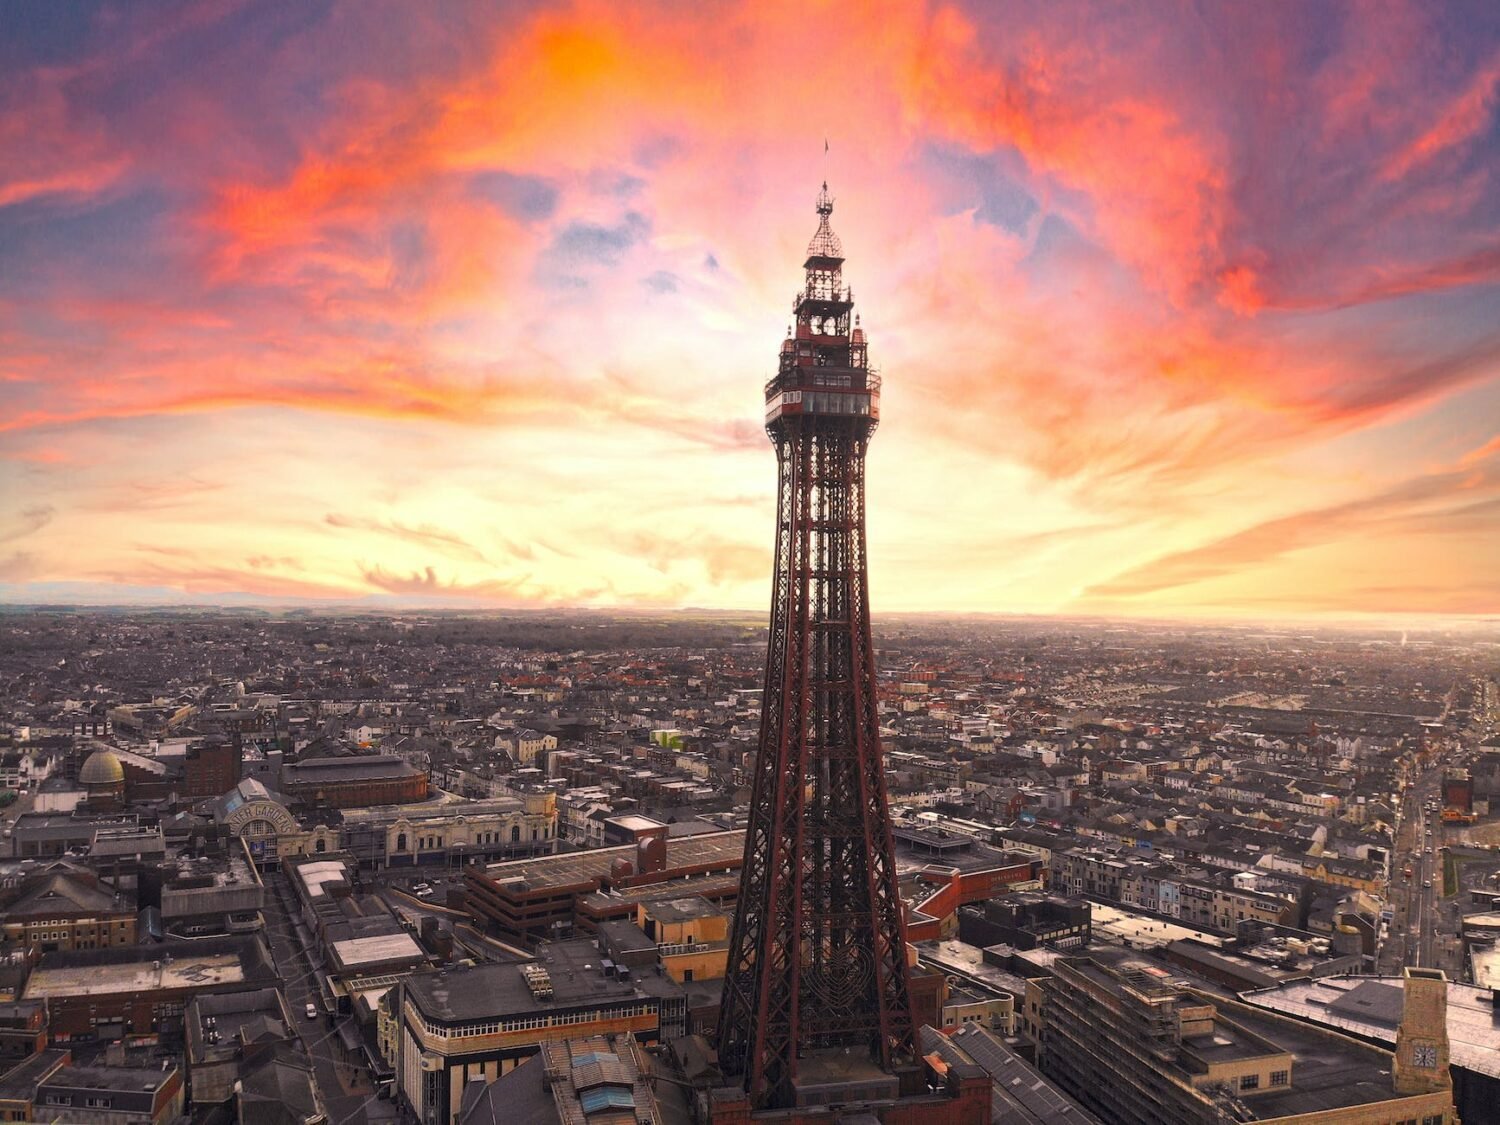 Thrills and Fun: Exploring Blackpool’s Theme Parks